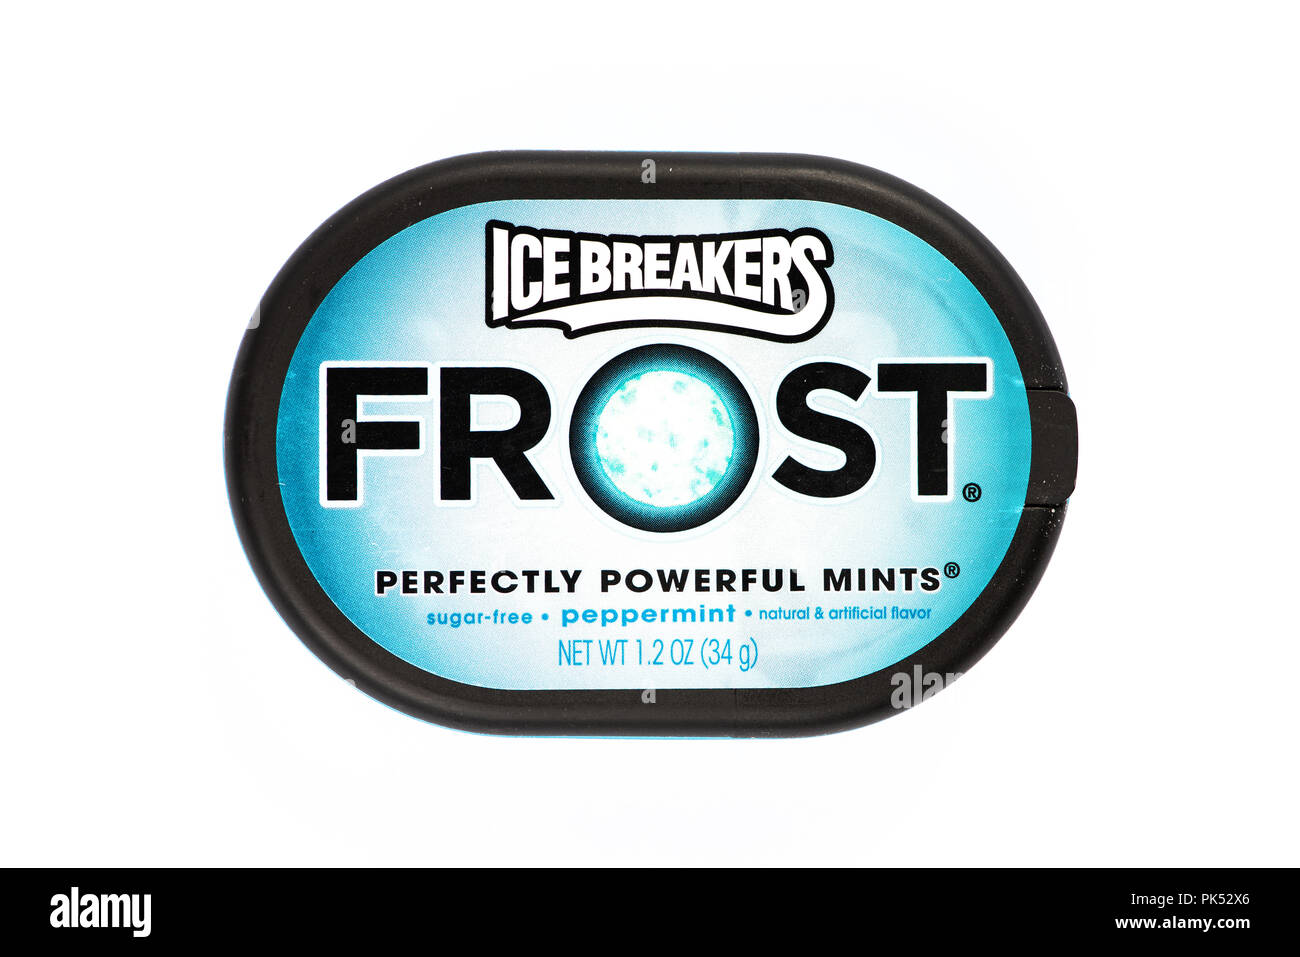 A plastic container of Ice Breakers Frost sugar-free peppermint candies. Stock Photo